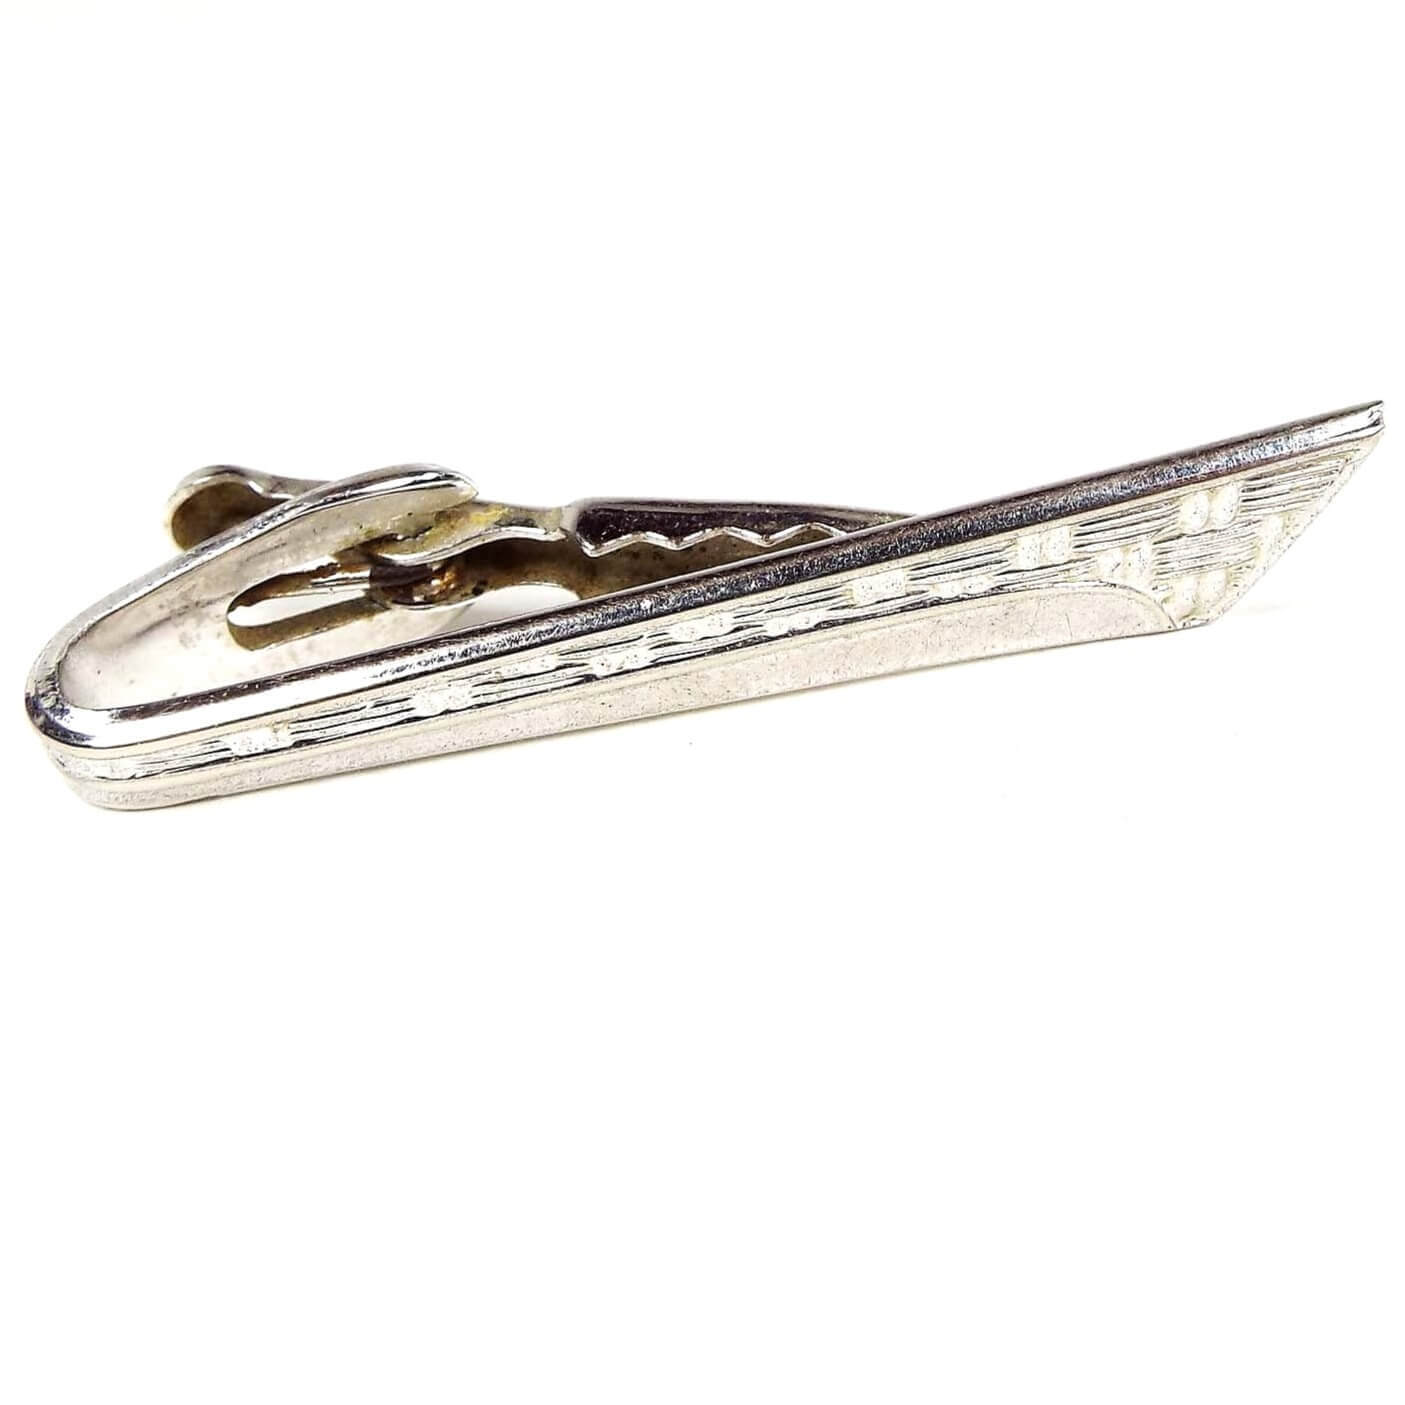 Front view of the Mid Century vintage Shields Modernist style tie clip. It is silver tone in color and has a textured pattern on the top part of the front with a thin curve design on the bottom. The end is angled and flares out at the top. 